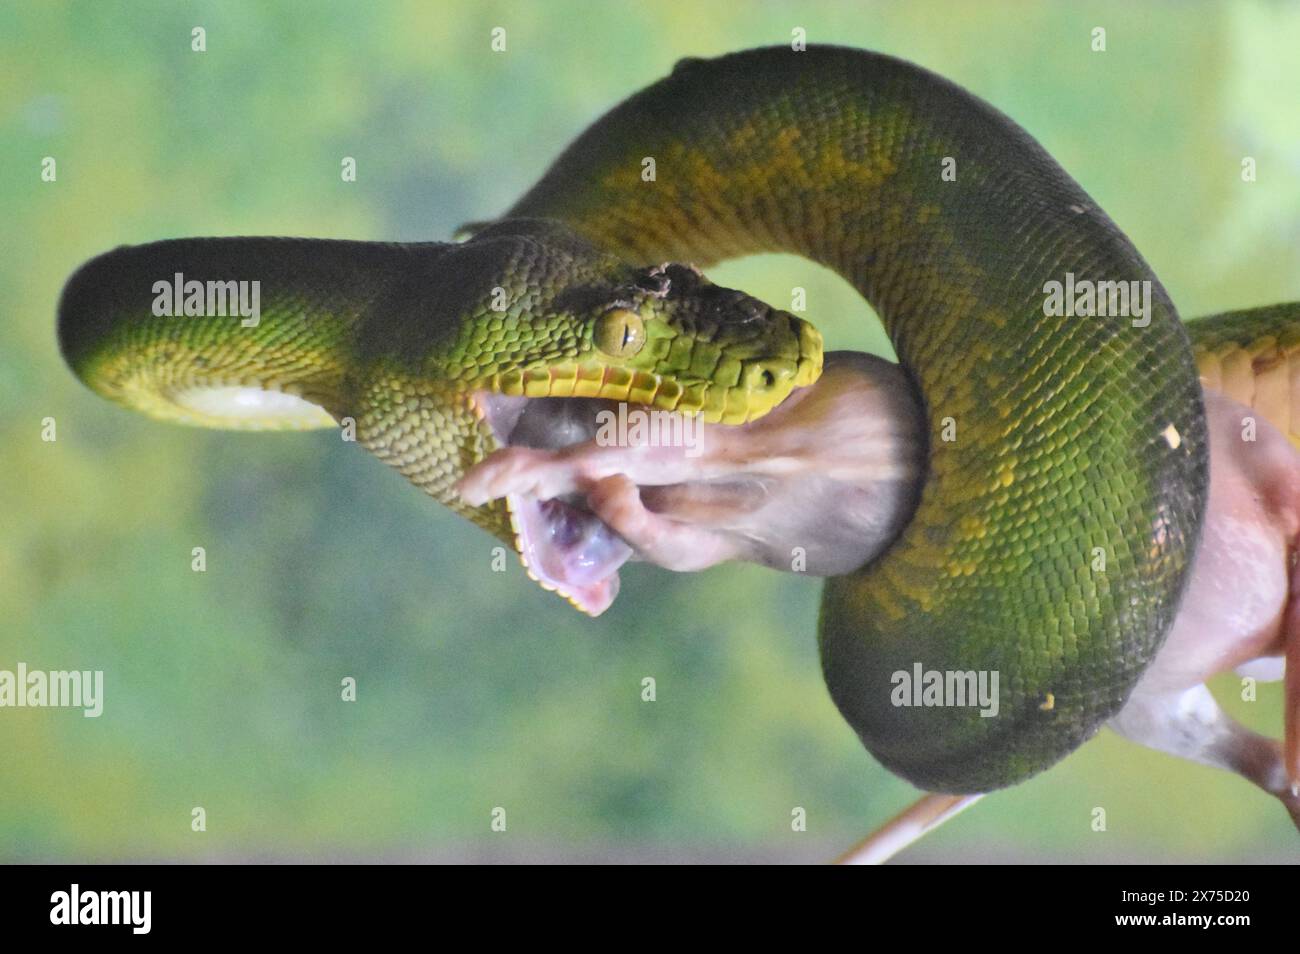 An emerald tree boa (Corallus caninus) eating a mouse. This boa species is found in the rainforests of South America. Stock Photo